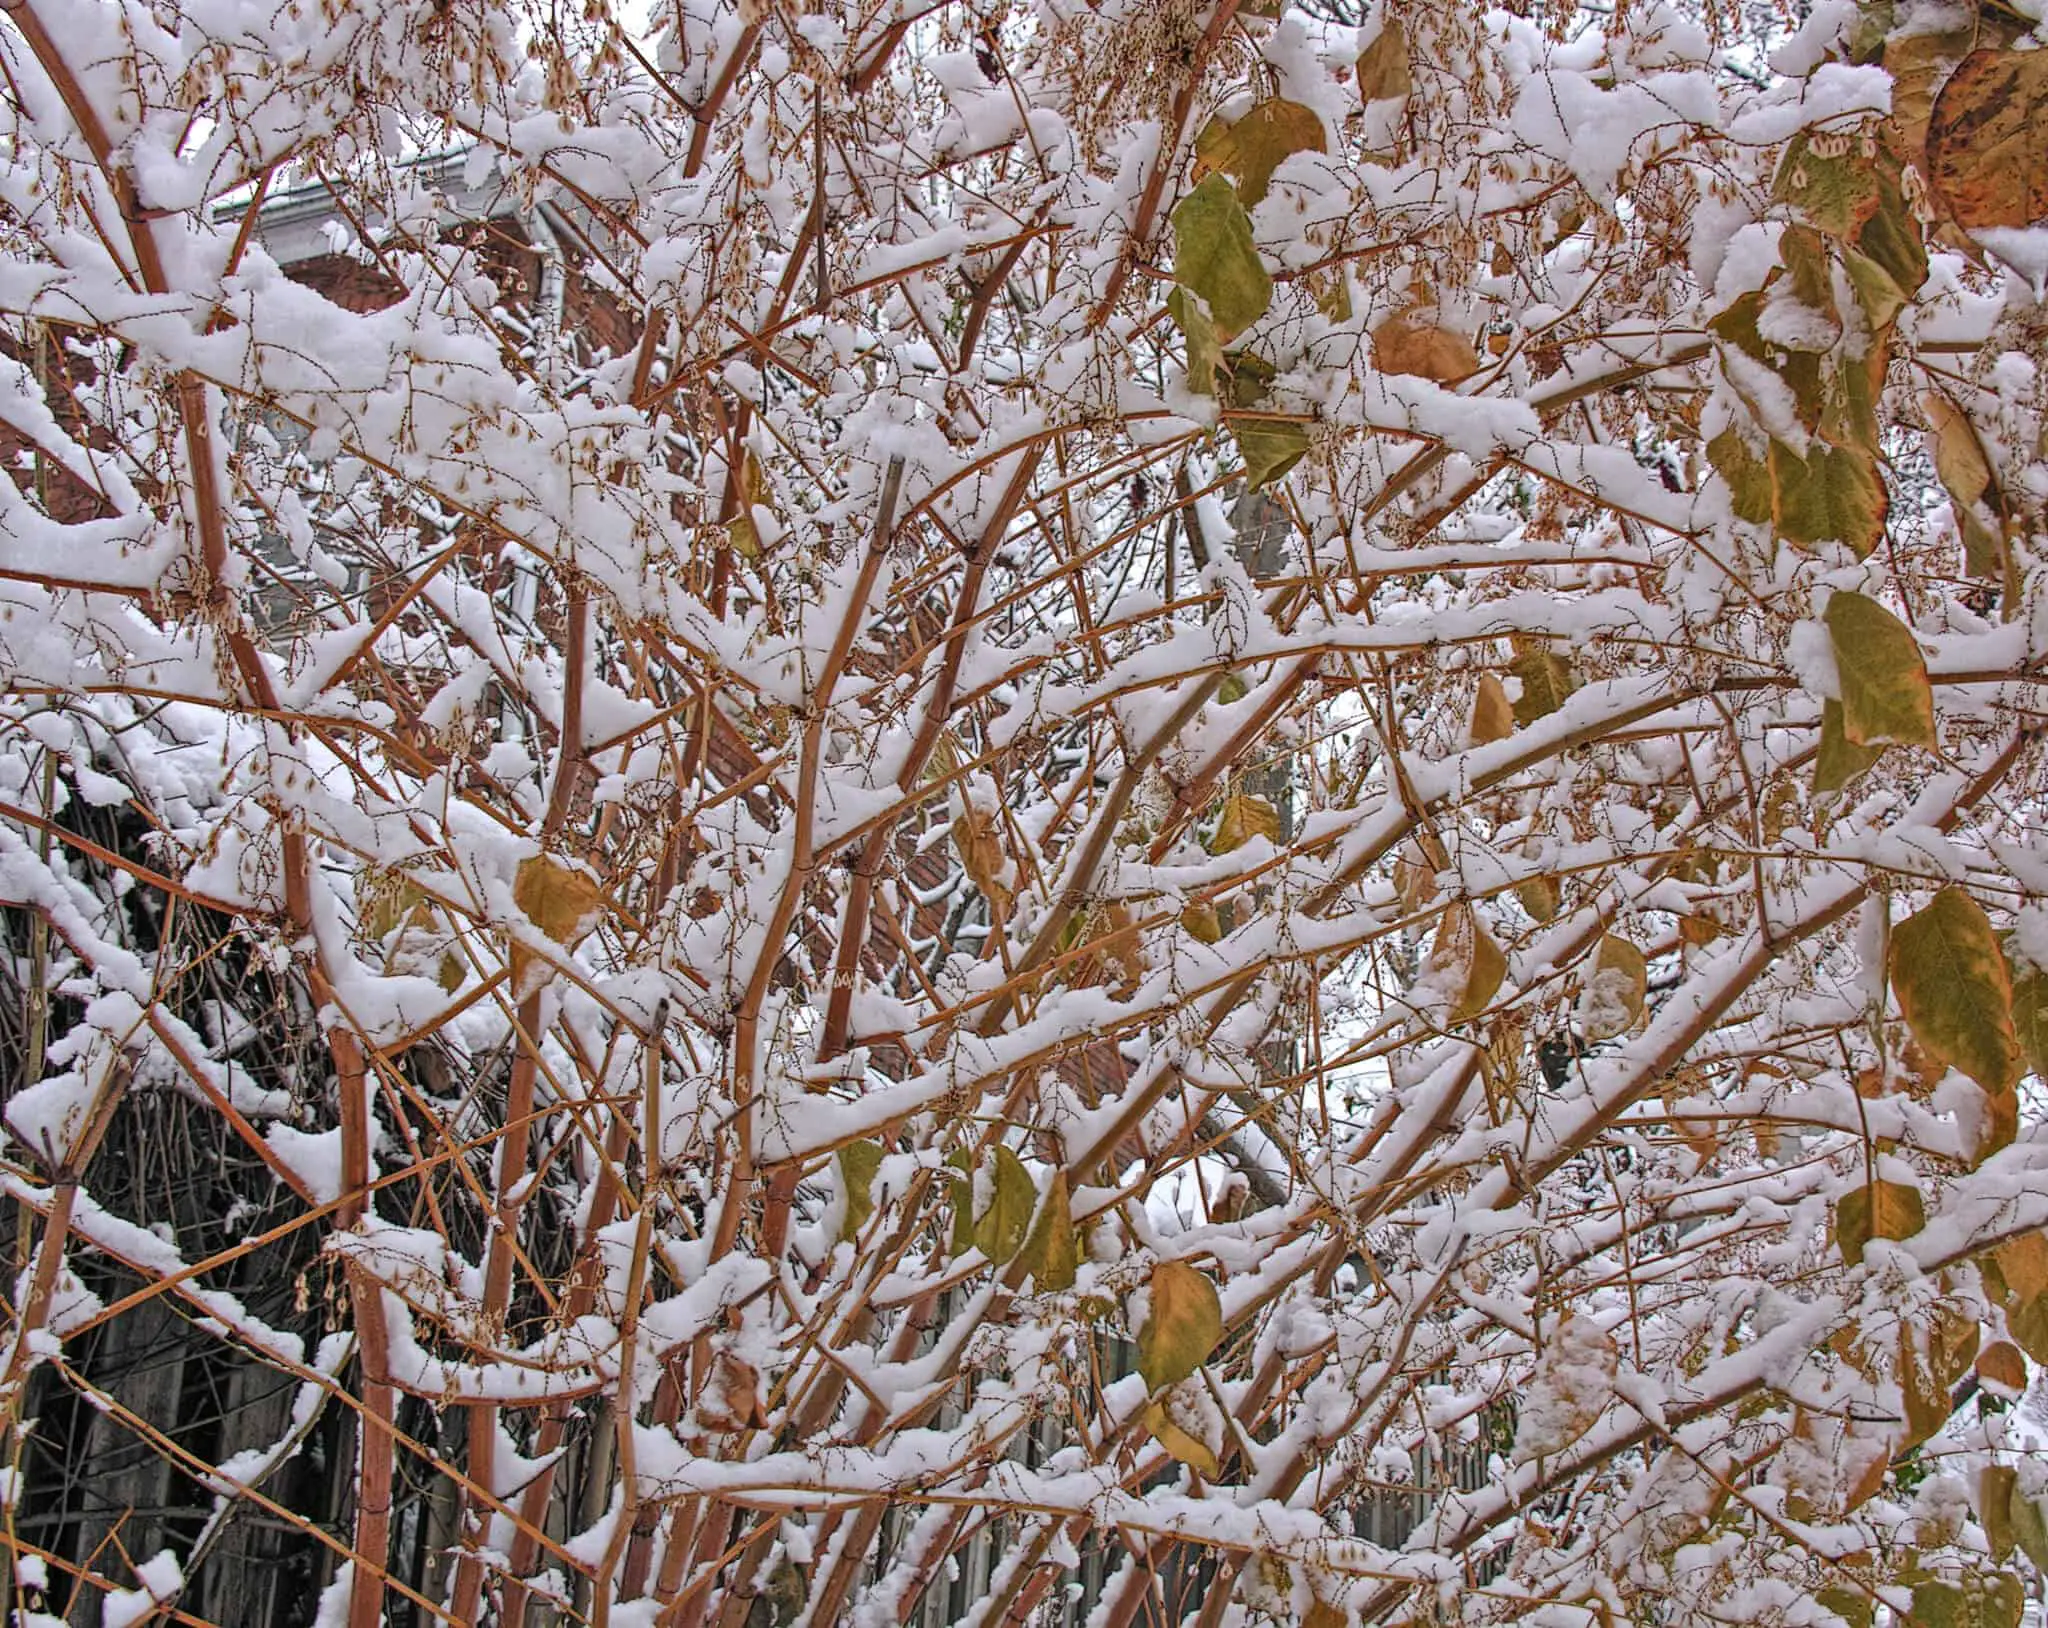 What does Japanese knotweed look like in winter - even when its died back in the winter, the stems are still several feet tall and imposing